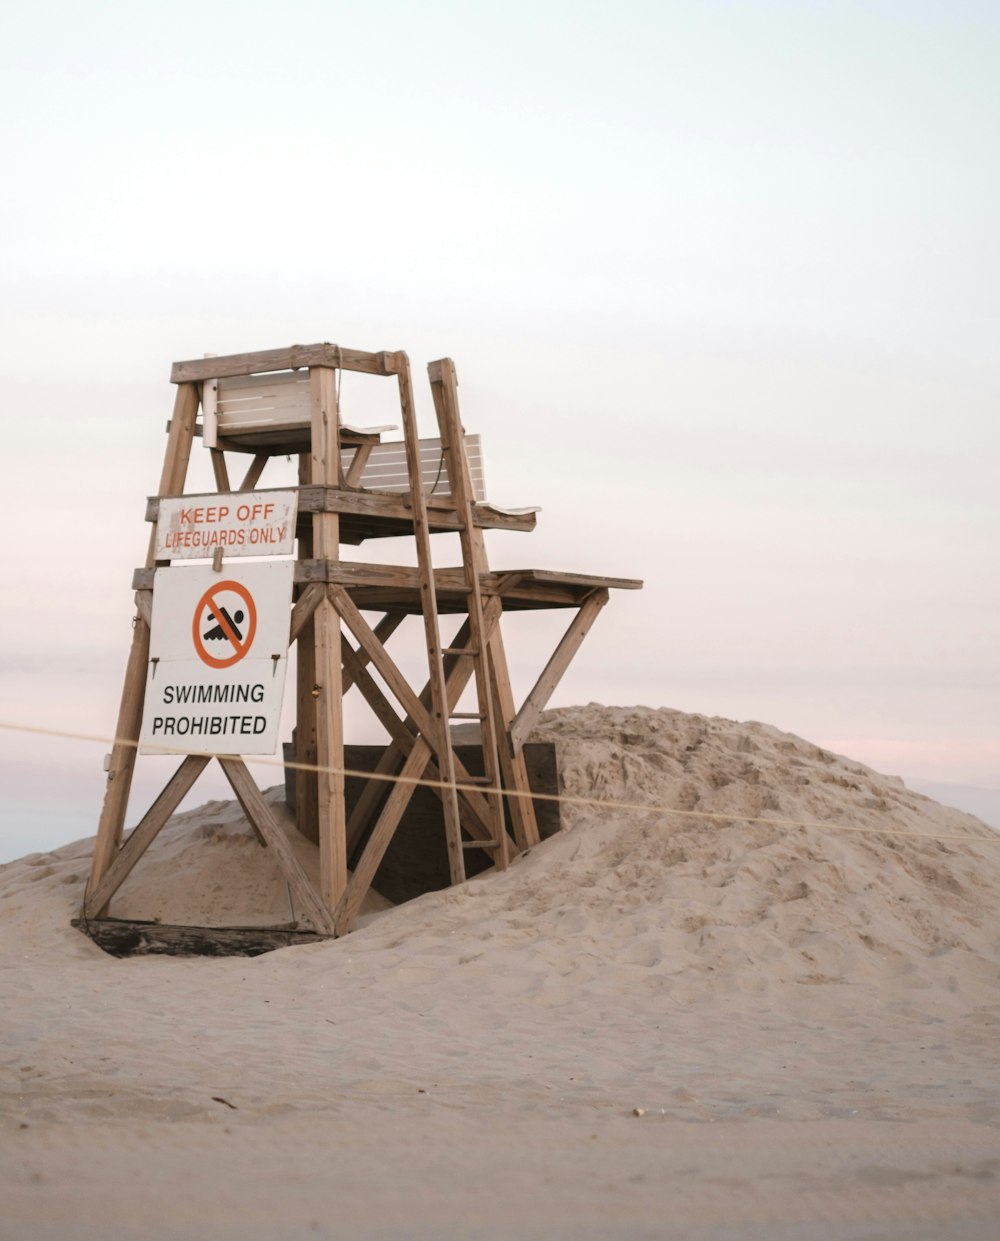 a wooden lifeguard tower sitting on top of a sandy beach